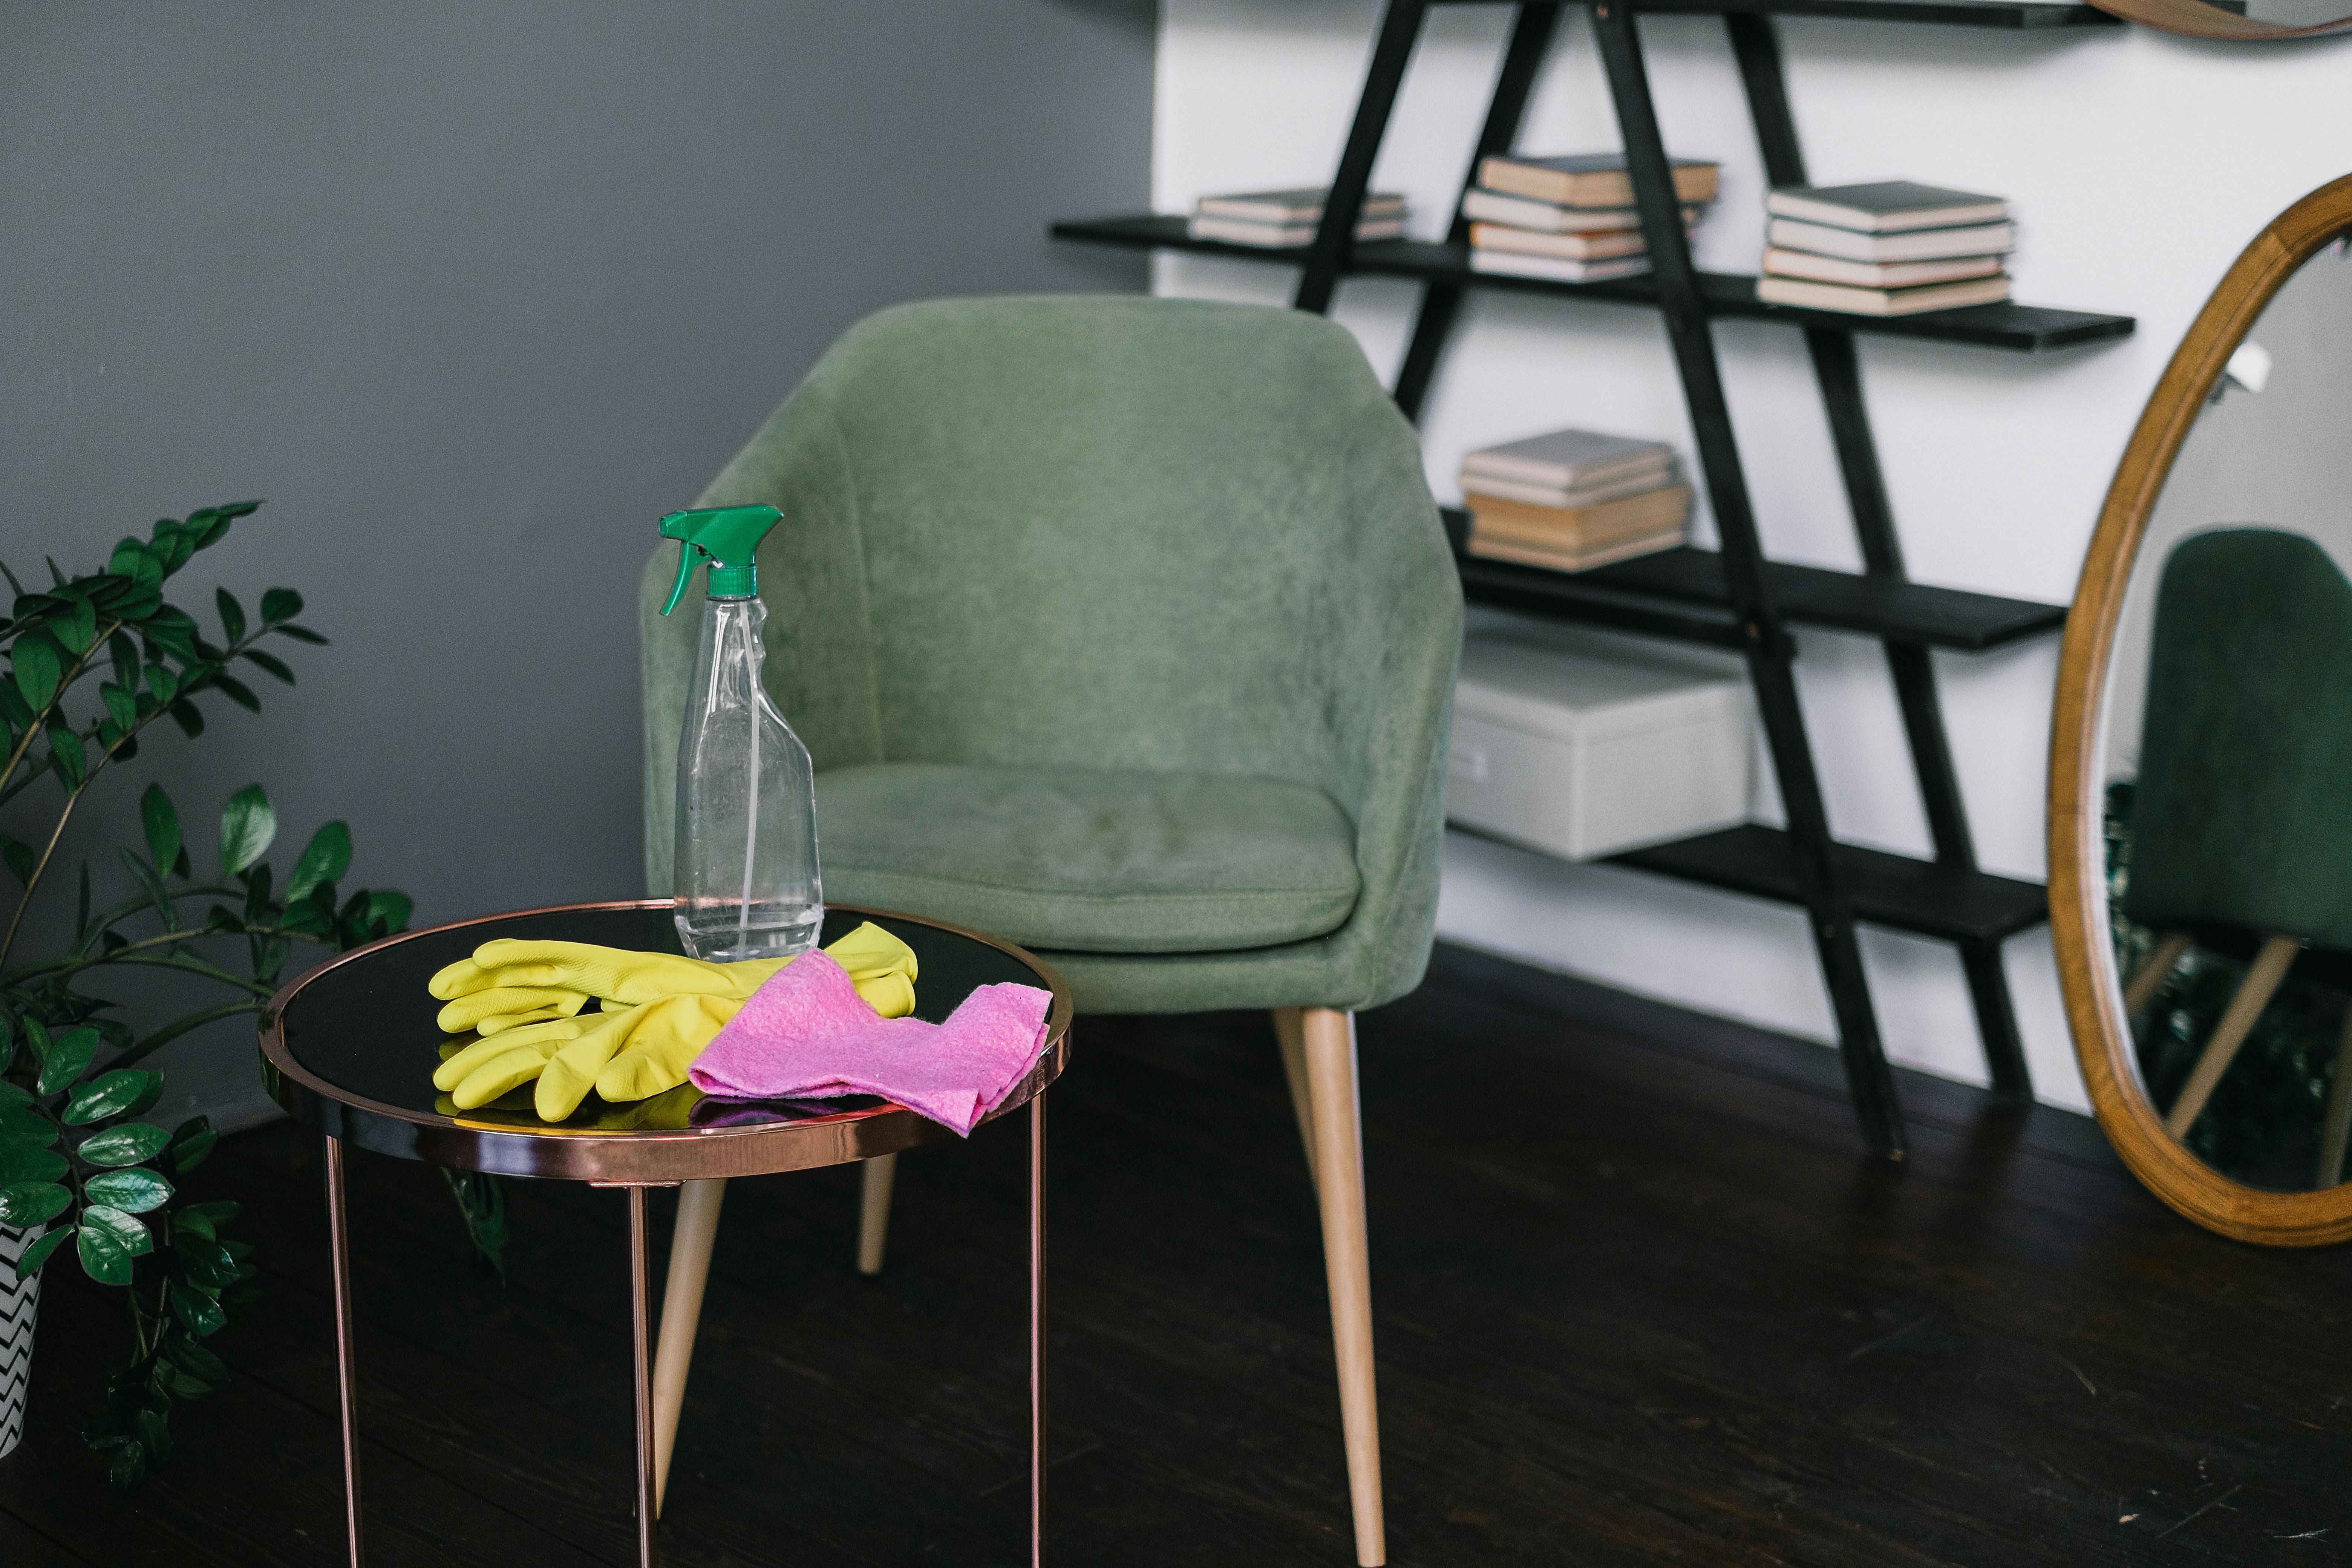 A chair with a spray, a cloth, and gloves close by | Source: Pexels